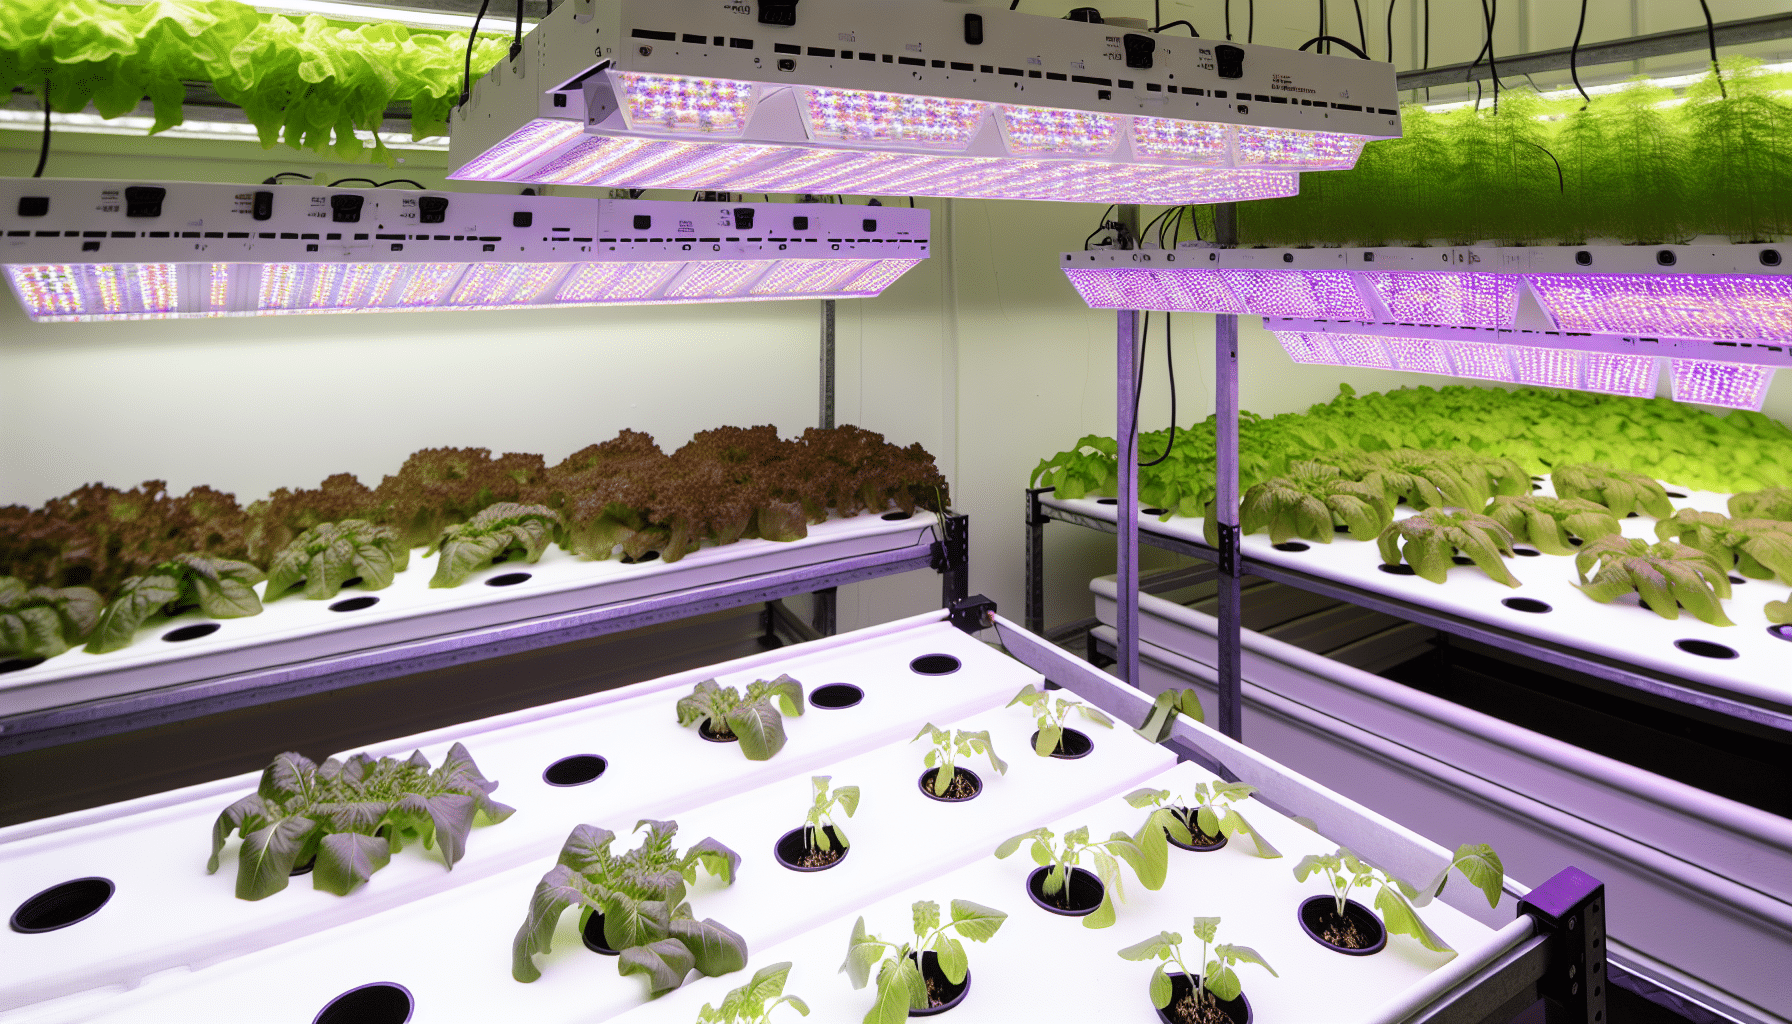 Optimizing hydroponic system with grow lights